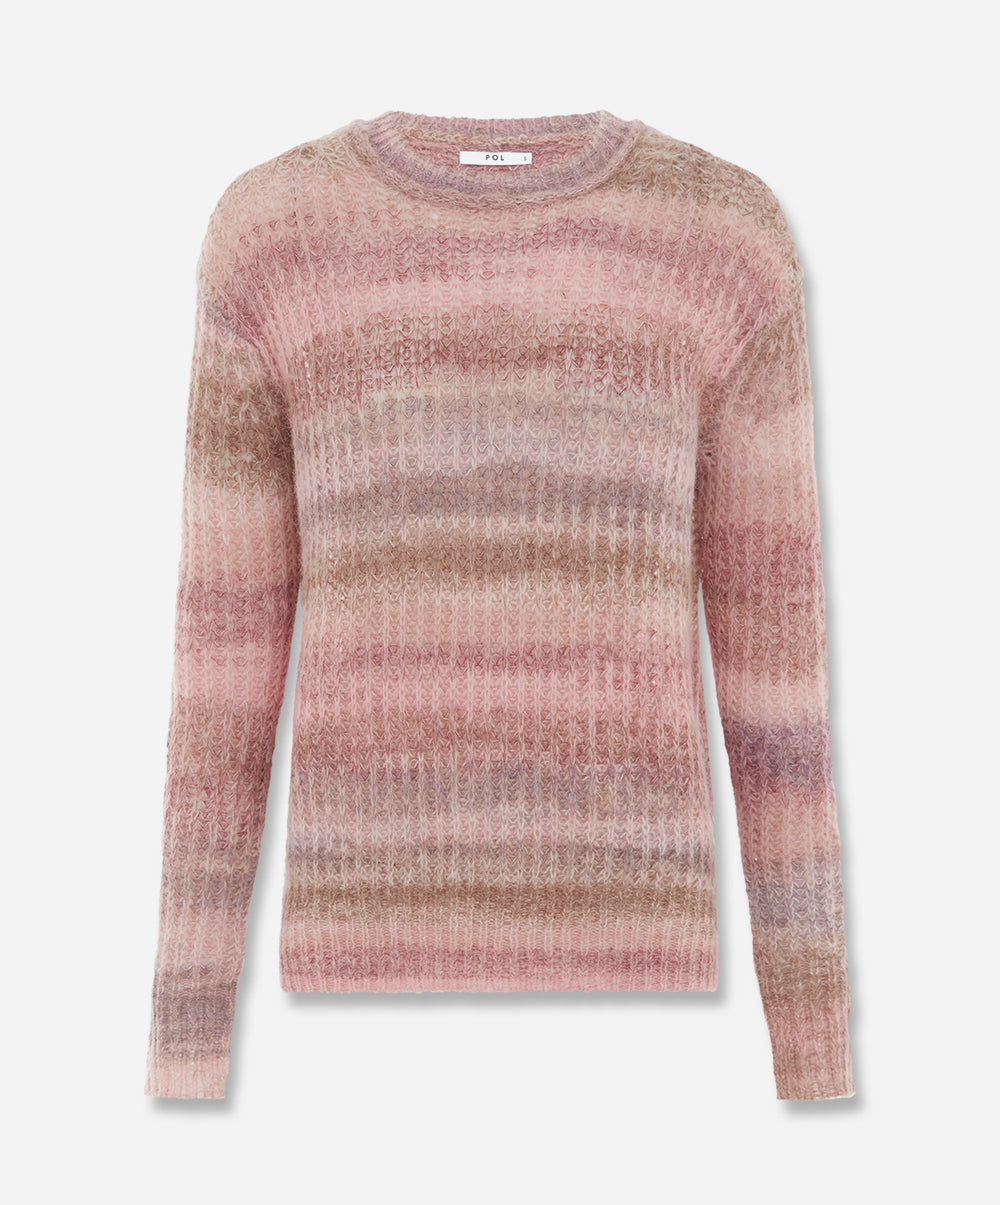 Russo Space Dyed Knit